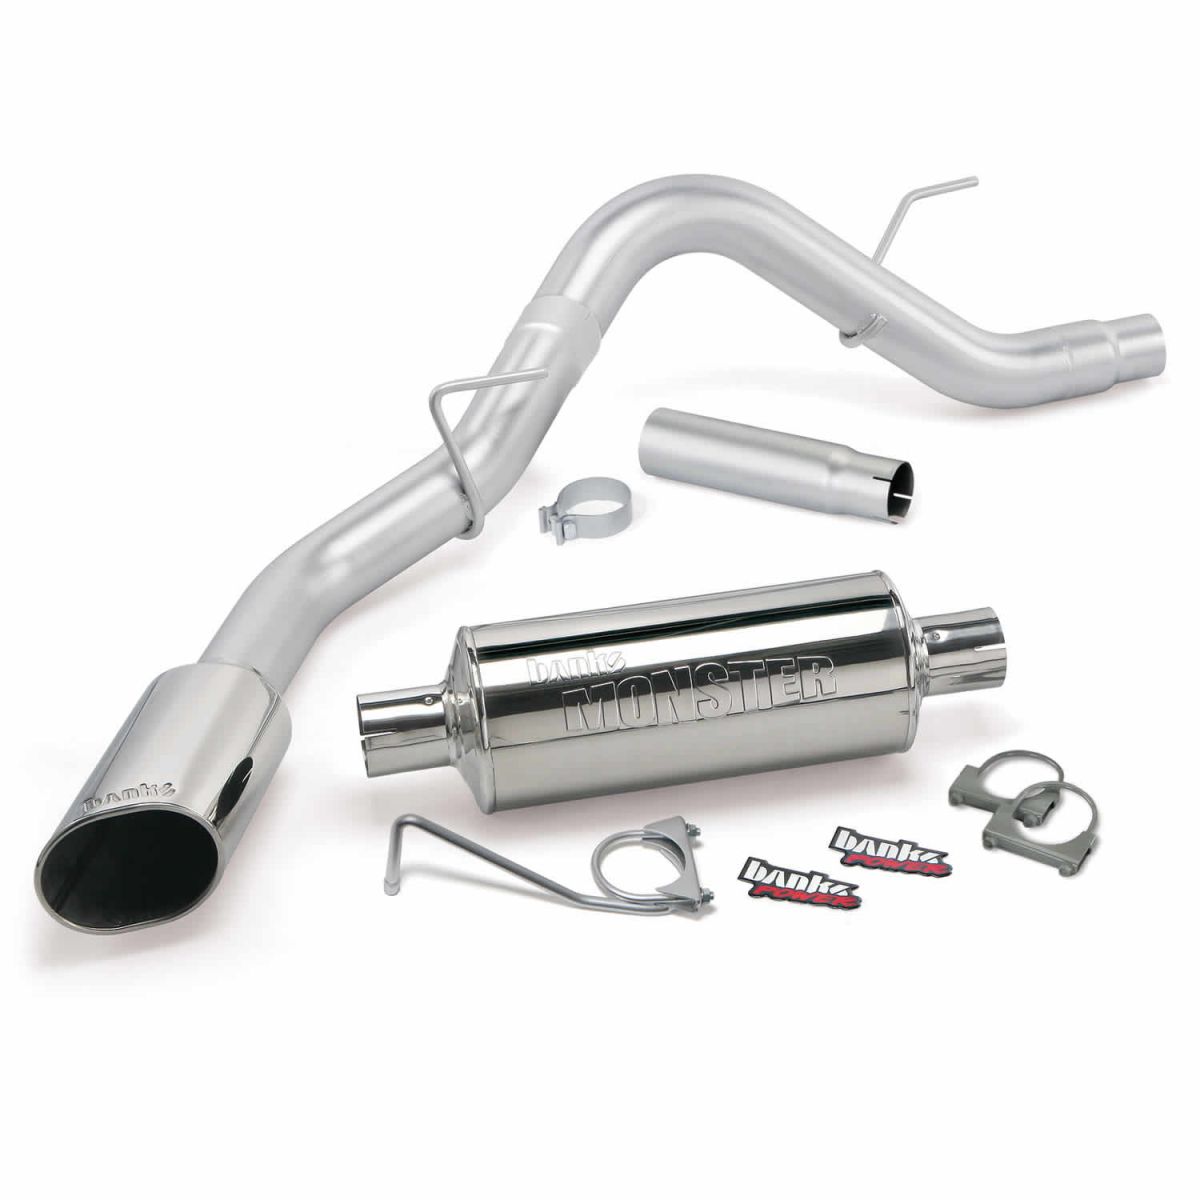 Banks Power - Banks Power Monster Exhaust System Single Exit With Chrome Tip For 15-19 F-150 2.7/3.5L EcoBoost & 5.0L (ECMB, CCSB, CCMB)